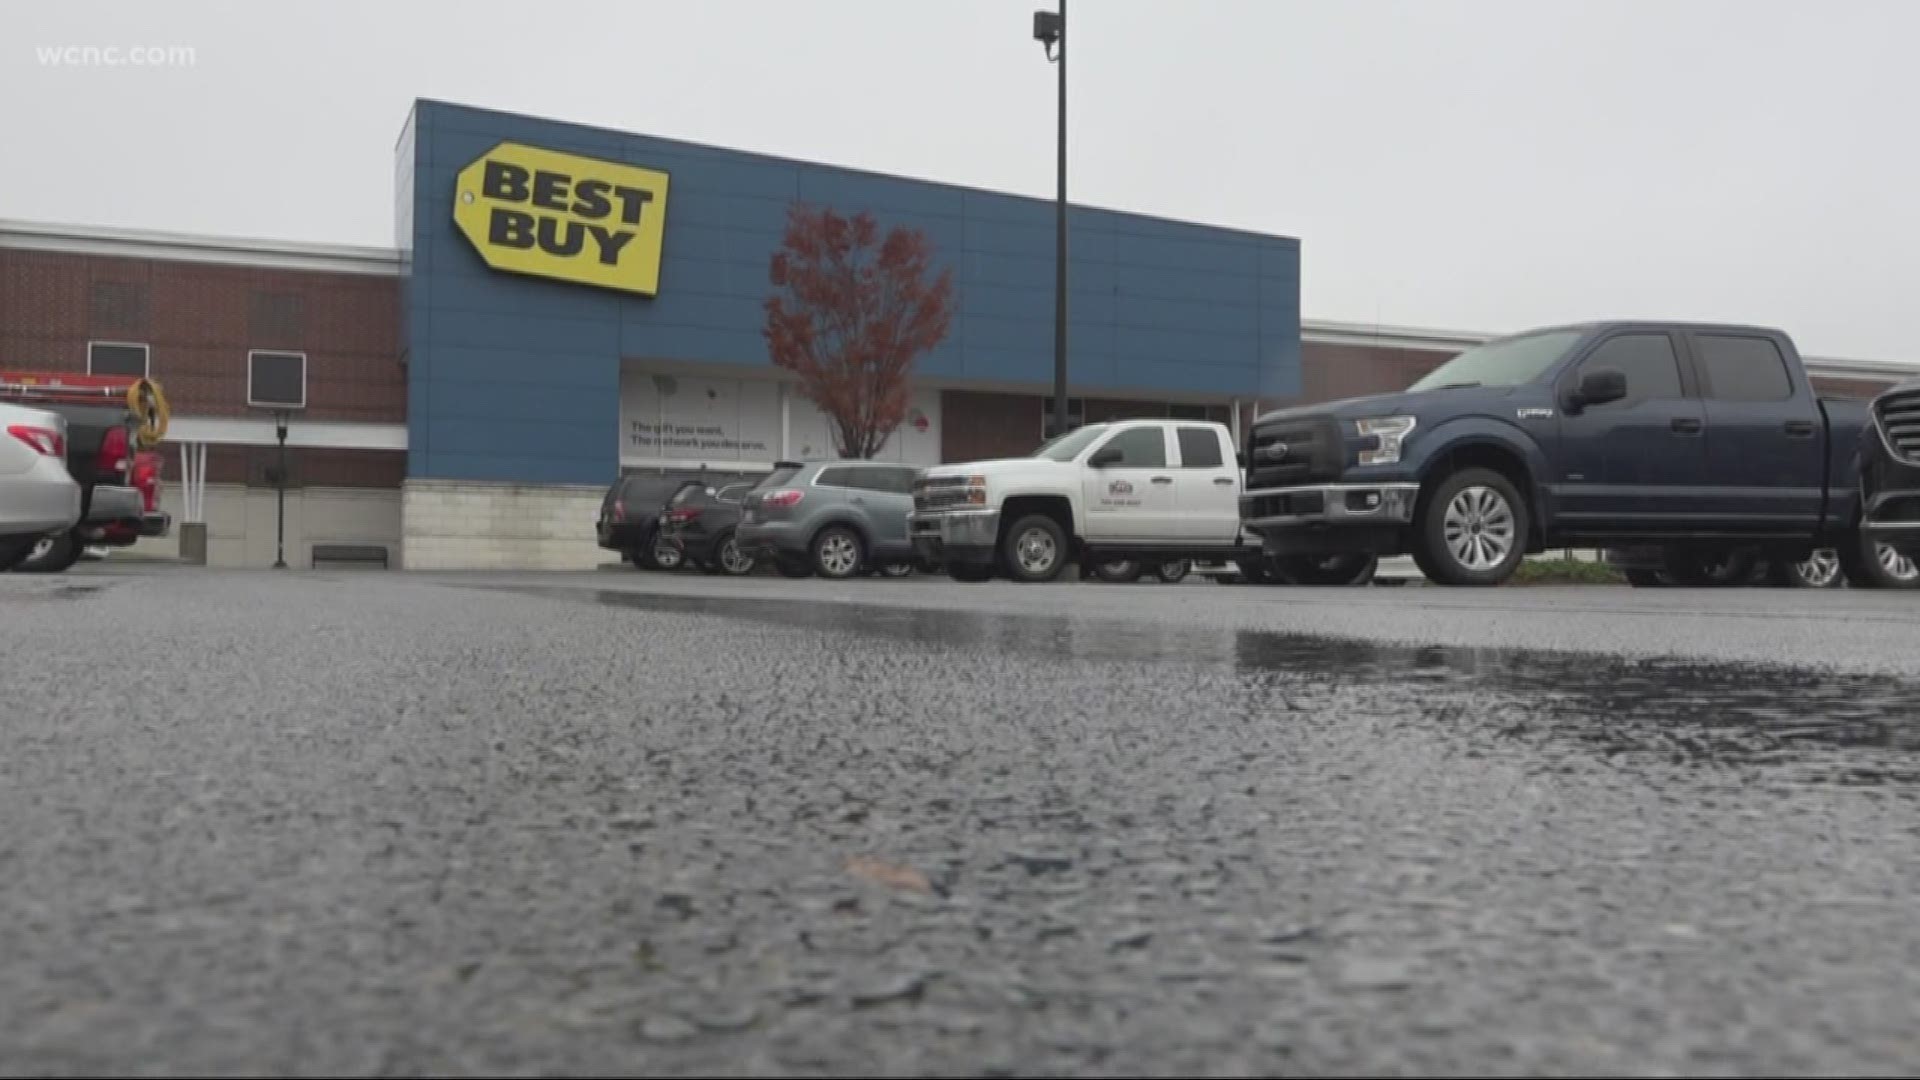 Over the weekend, police said a suspect with a knife targeted Best Buy on Perimeter Parkway. Just last month, Home Depot in the University area was robbed at gunpoint.